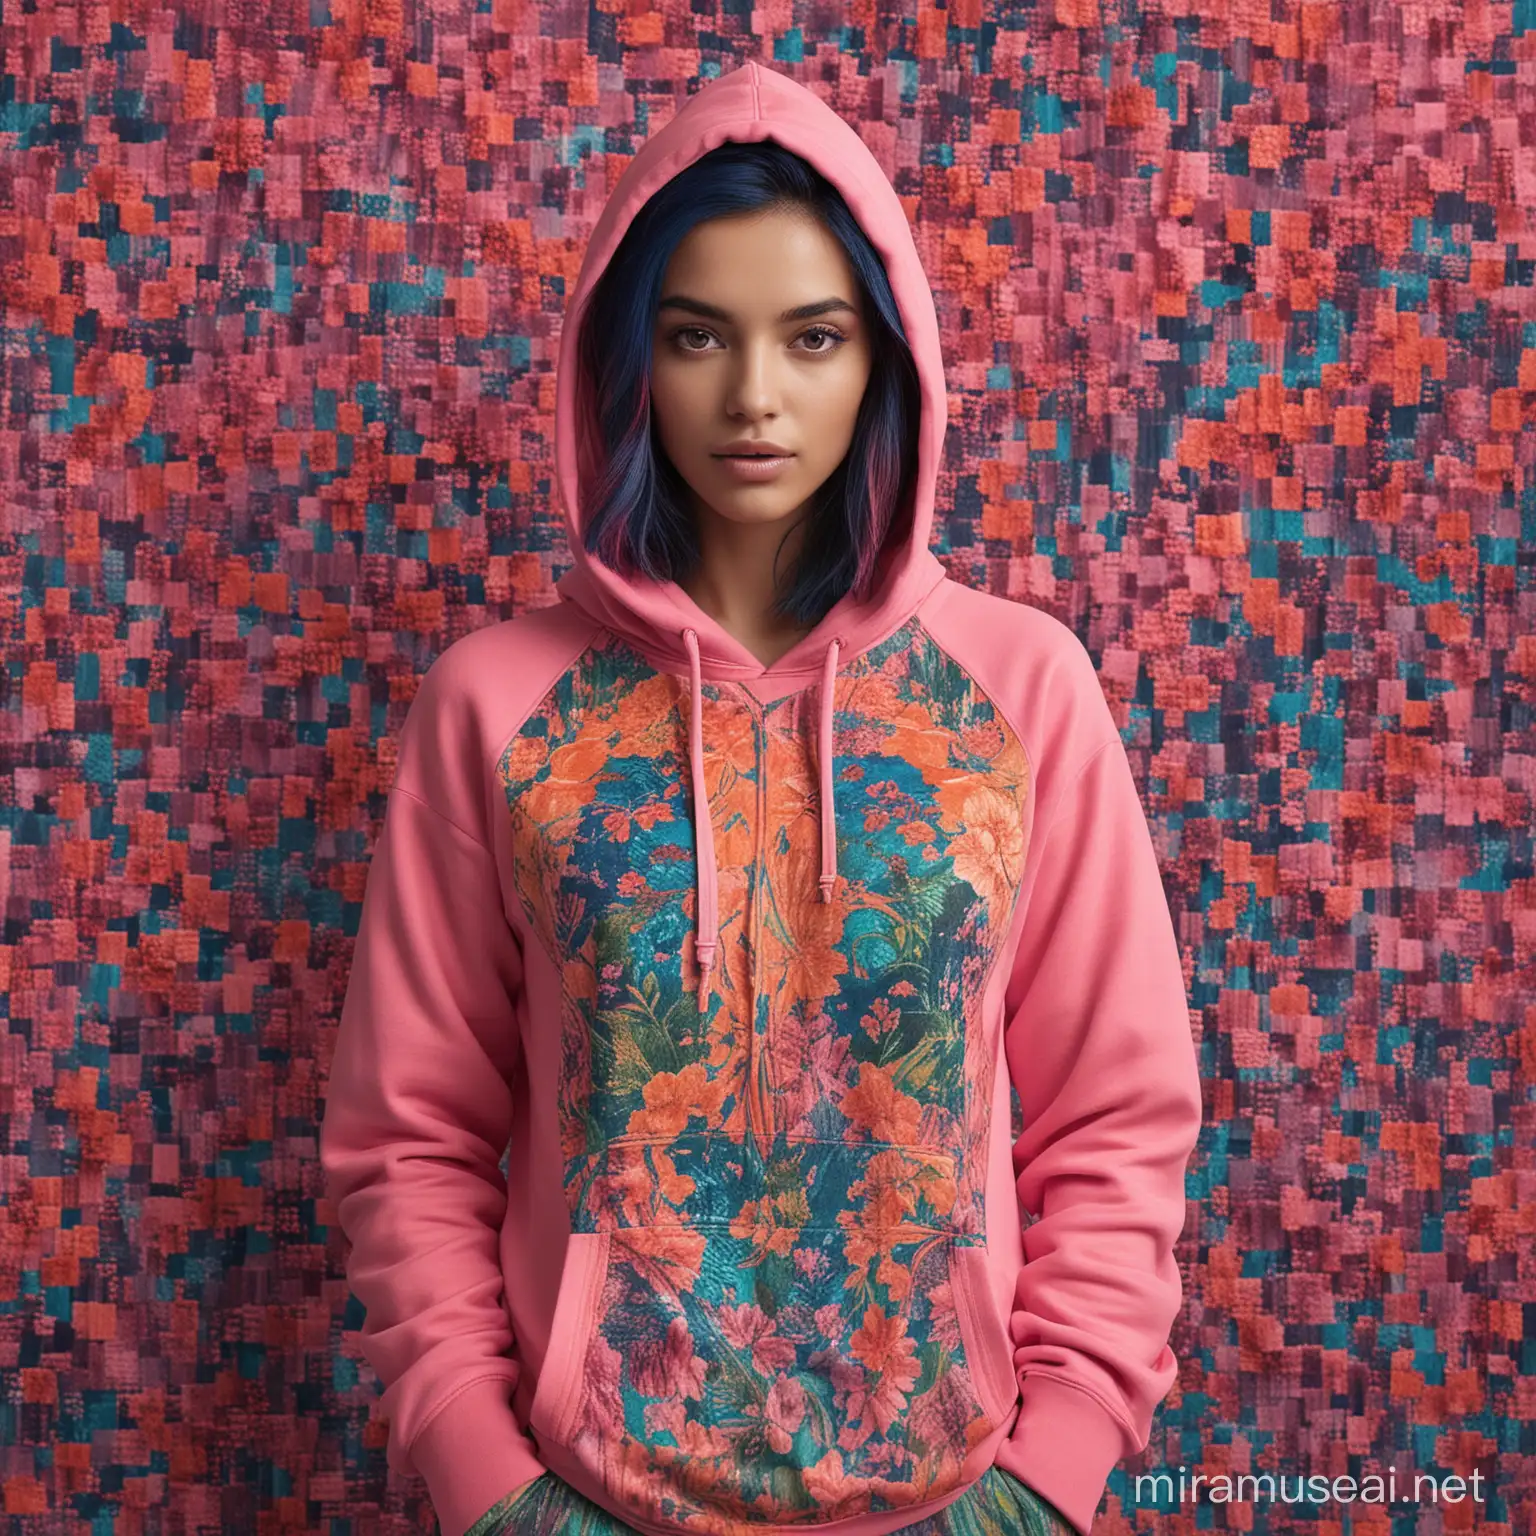 create a fashion collection of hoodie showcasing the essence of elegance and movement. Experiment with vibrant colors of pinks and blues and oranges and greens different draping patterns and combinations of texture and pattern and hues to evoke the dynamic energy of movement . goal is to inspire a fresh, edgy, elaborate and over the top designs that are still chic and modern looks that celebrate individuality and self expression and futuristic